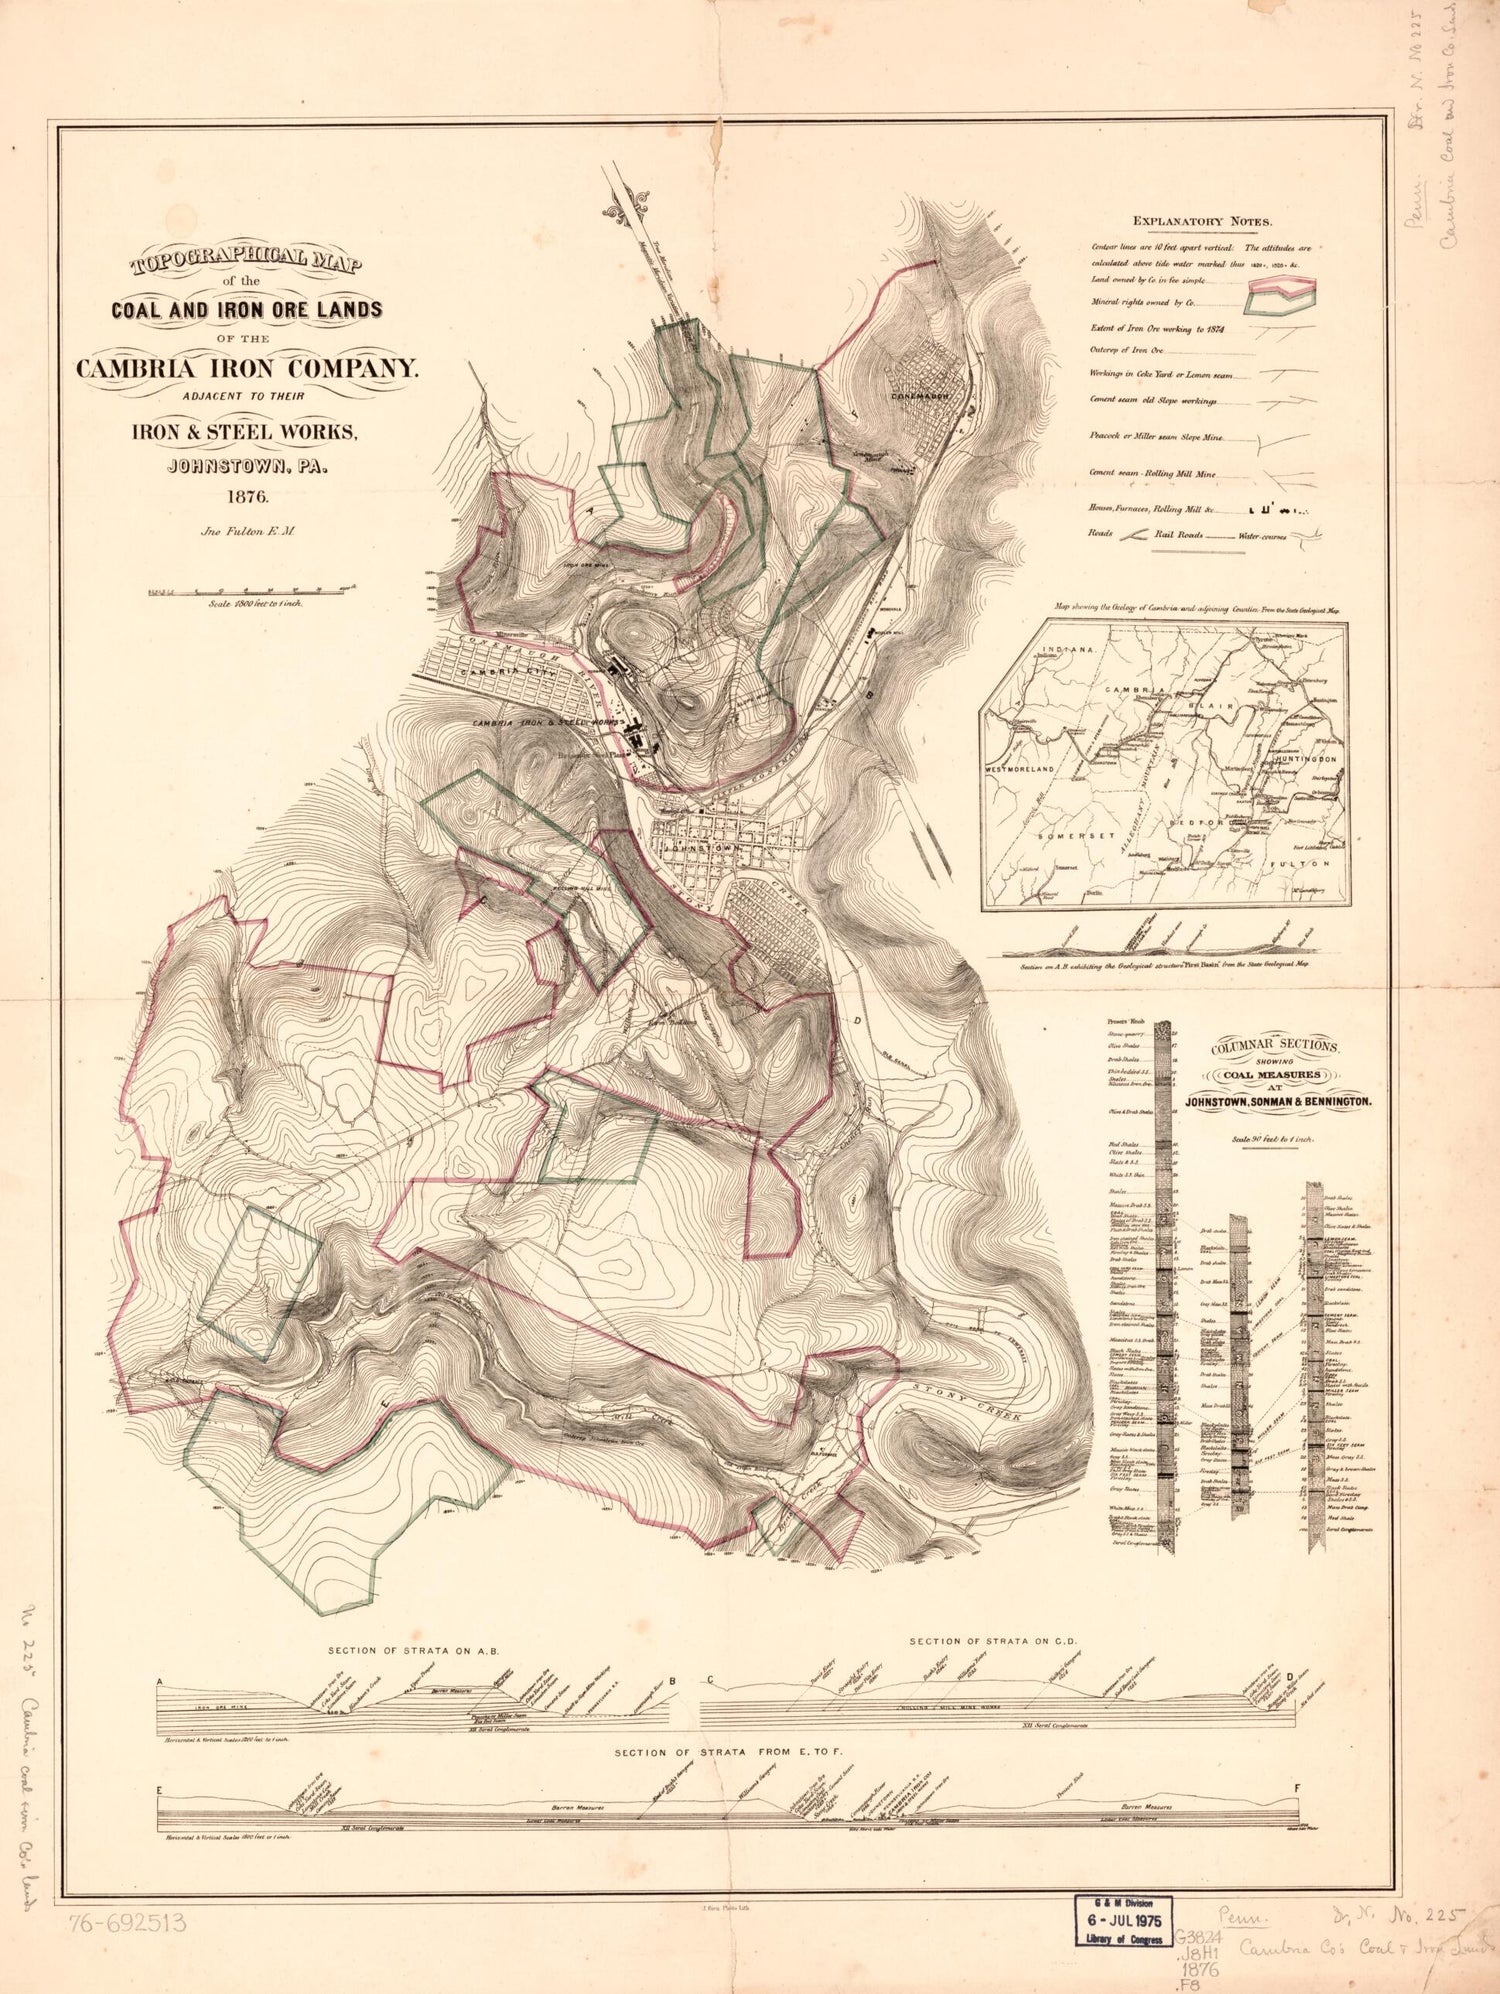 This old map of Topographical Map of the Coal and Iron Ore Lands of the Cambria Iron Company Adjacent to Their Iron &amp; Steel Works, Johnstown, Pennsylvania from 1876 was created by  Cambria Iron Company, John Fulton,  Julius Bien &amp; Co in 1876